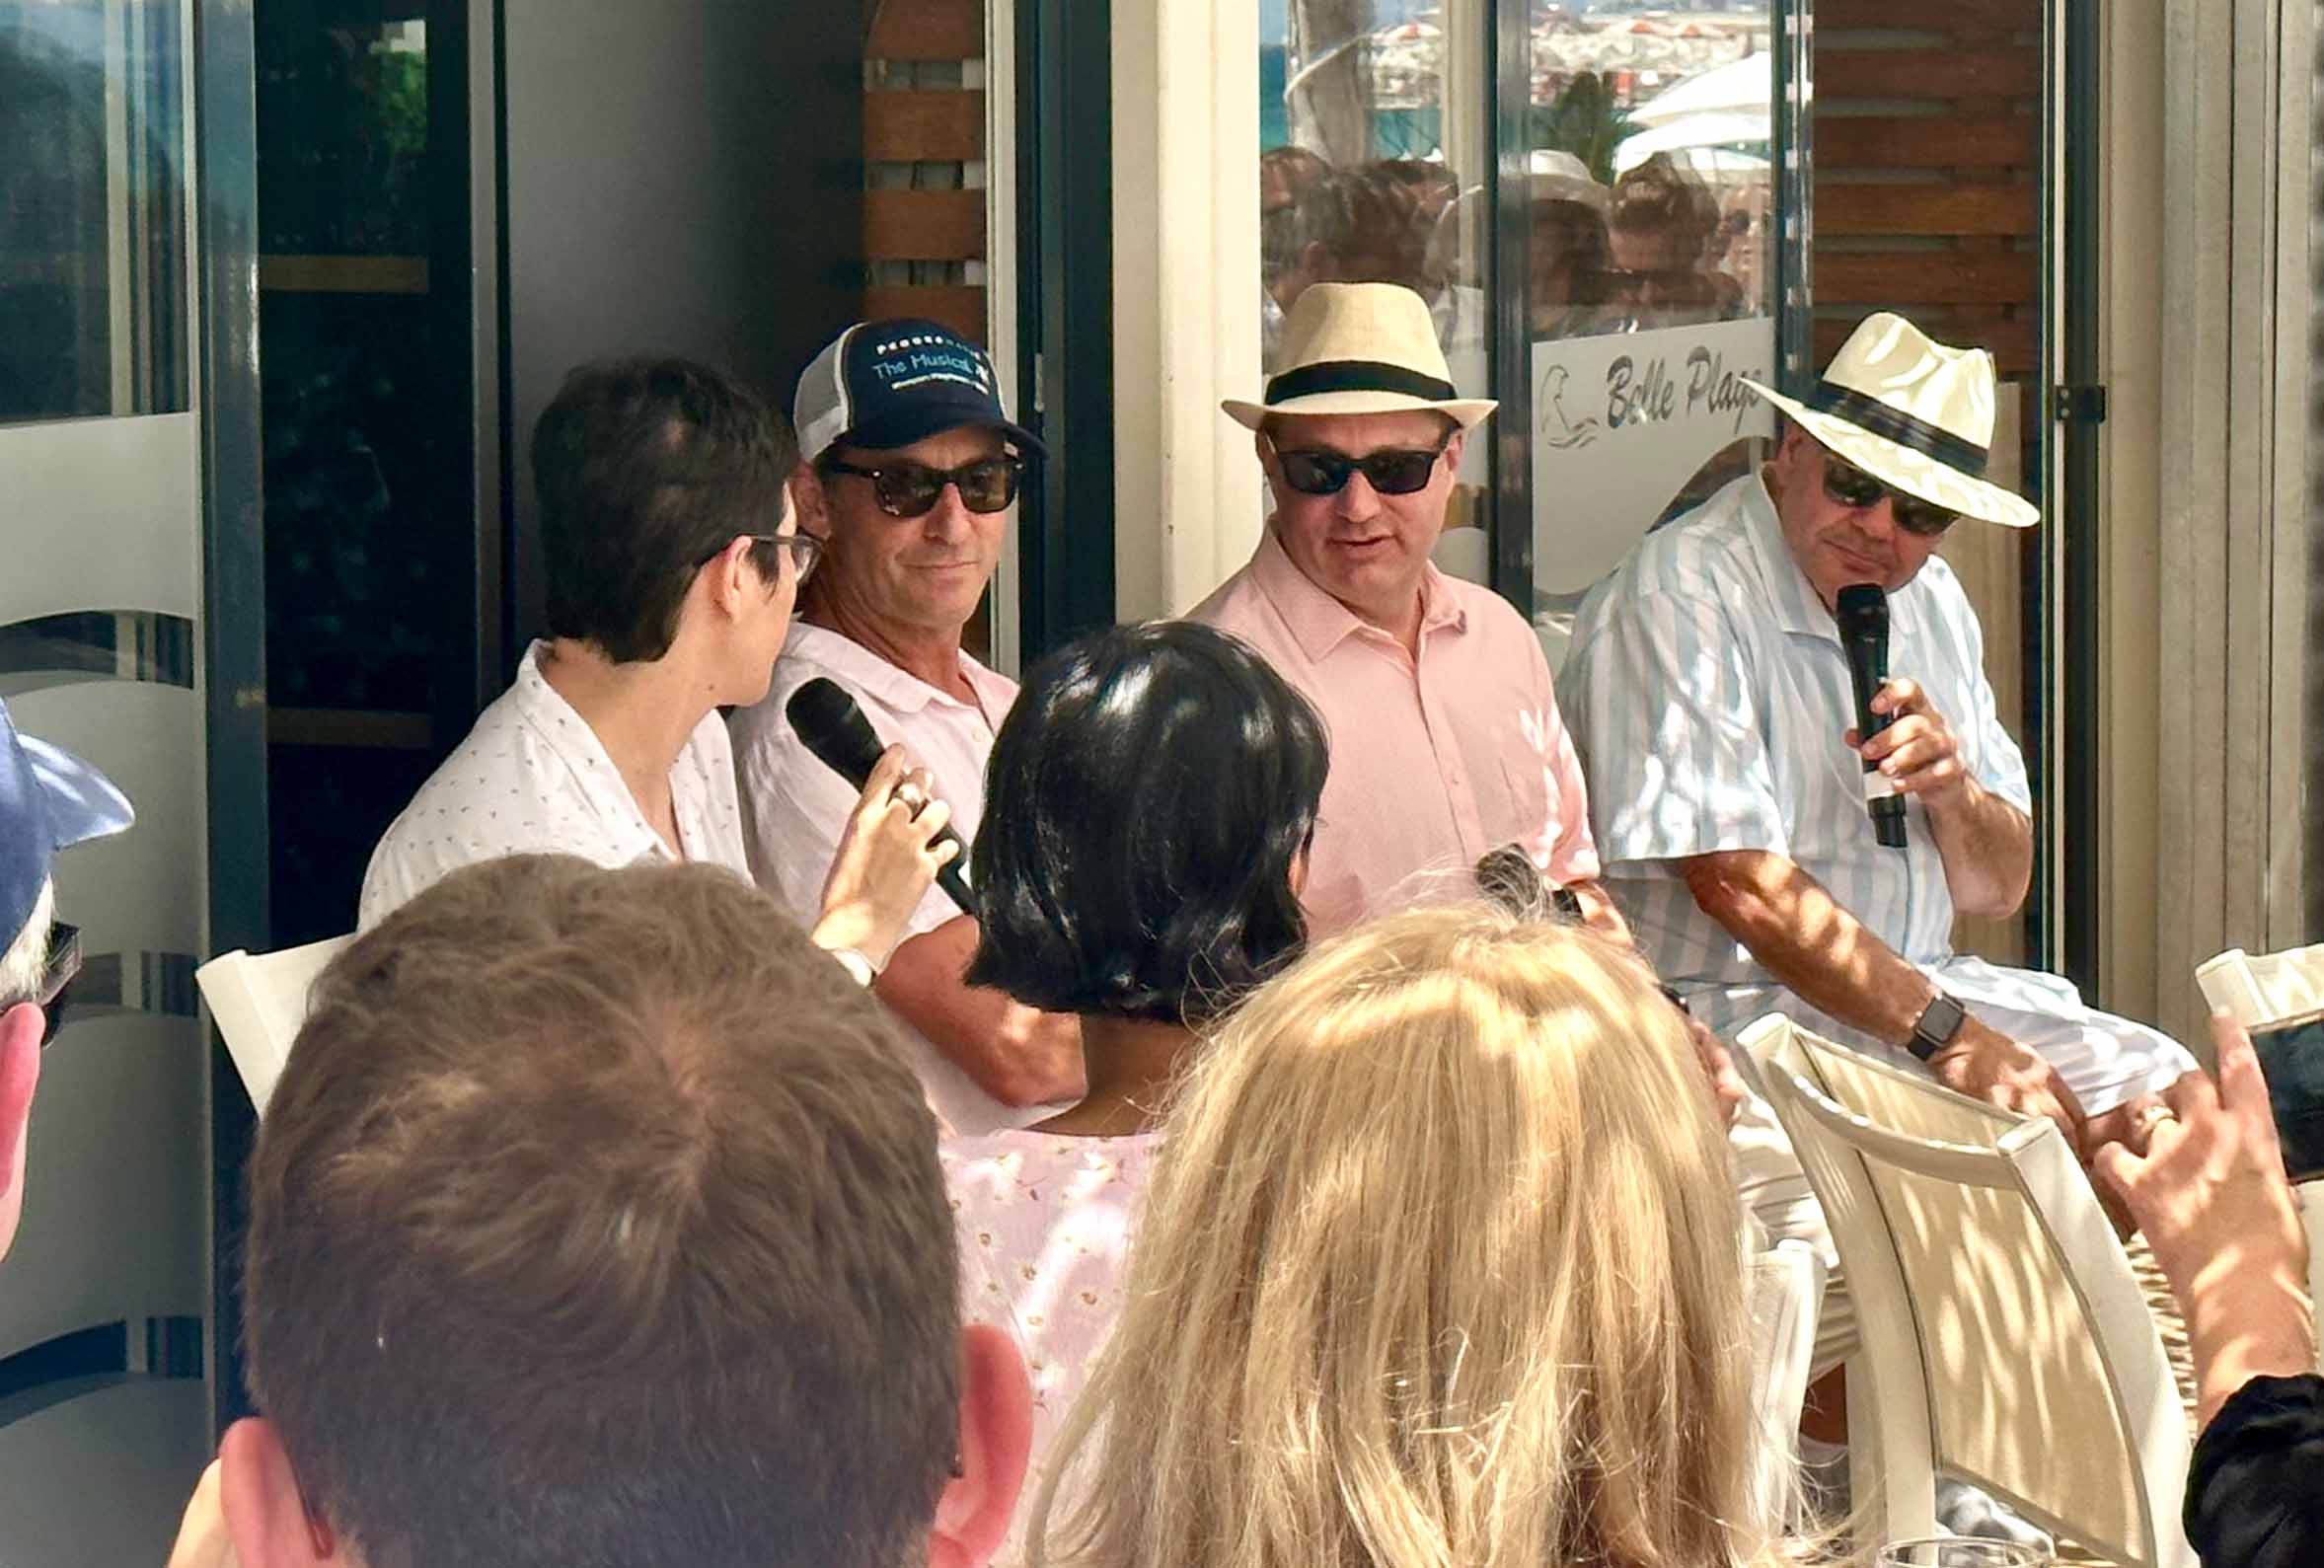 David Kohl, Tom Triscari, Lou Pascalis, and Allison Schiff at the 2023 Cannes Lions